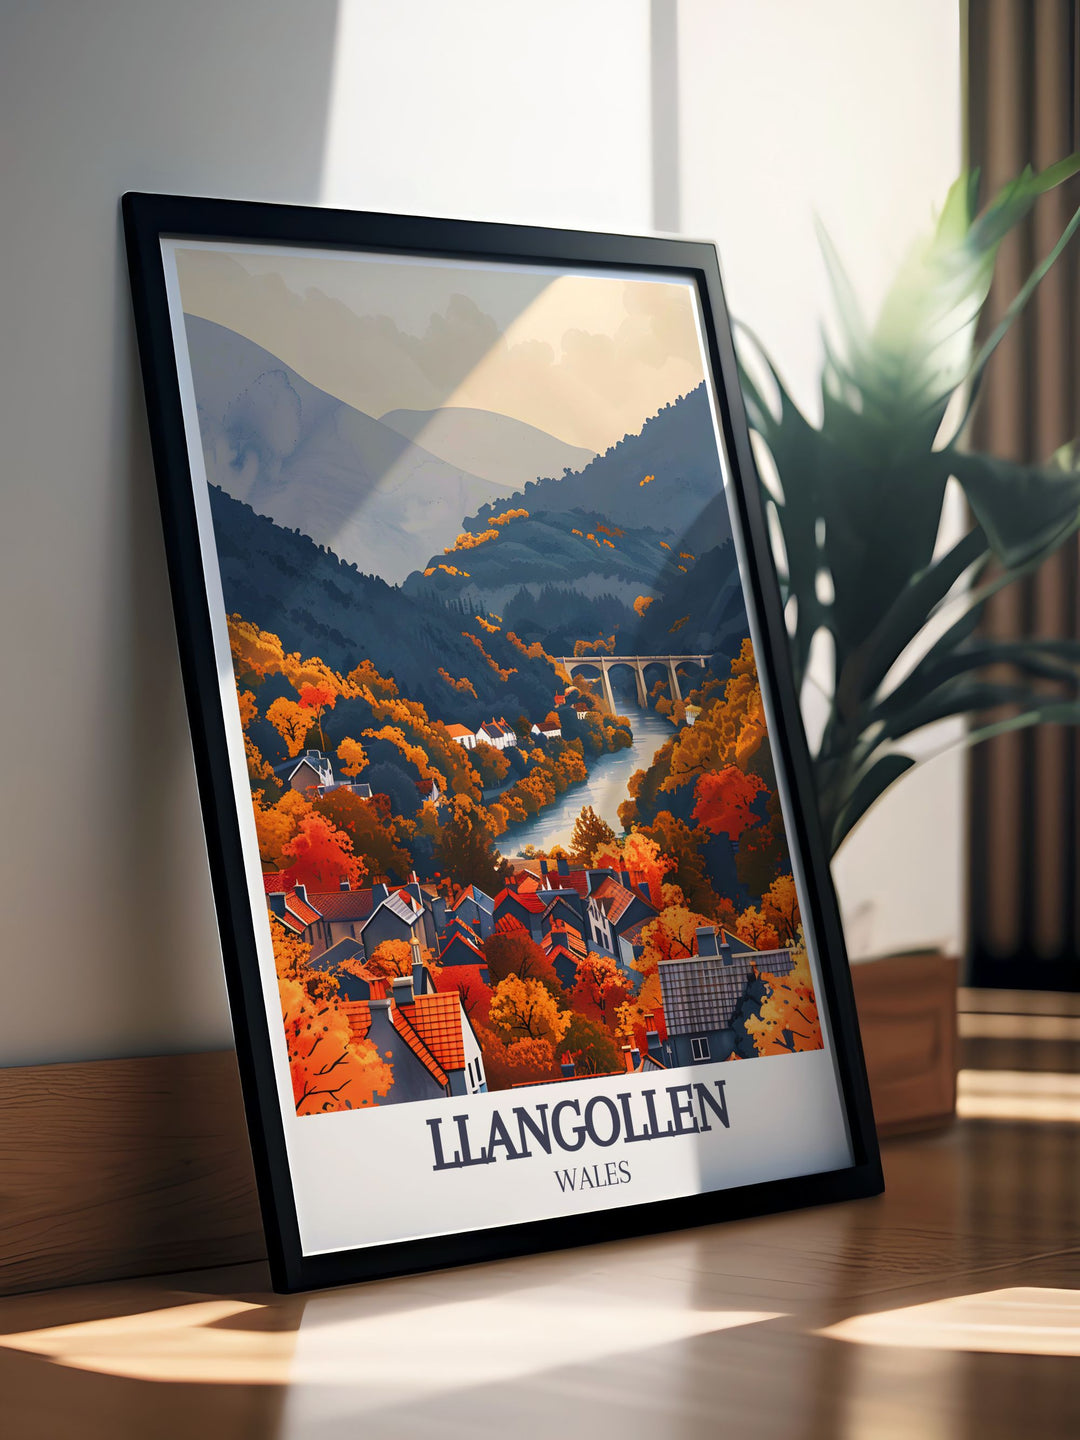 Bring home the beauty of Llangollen with this print featuring River Dee and Pontcysyllte Aqueduct, ideal for Wales wall art.